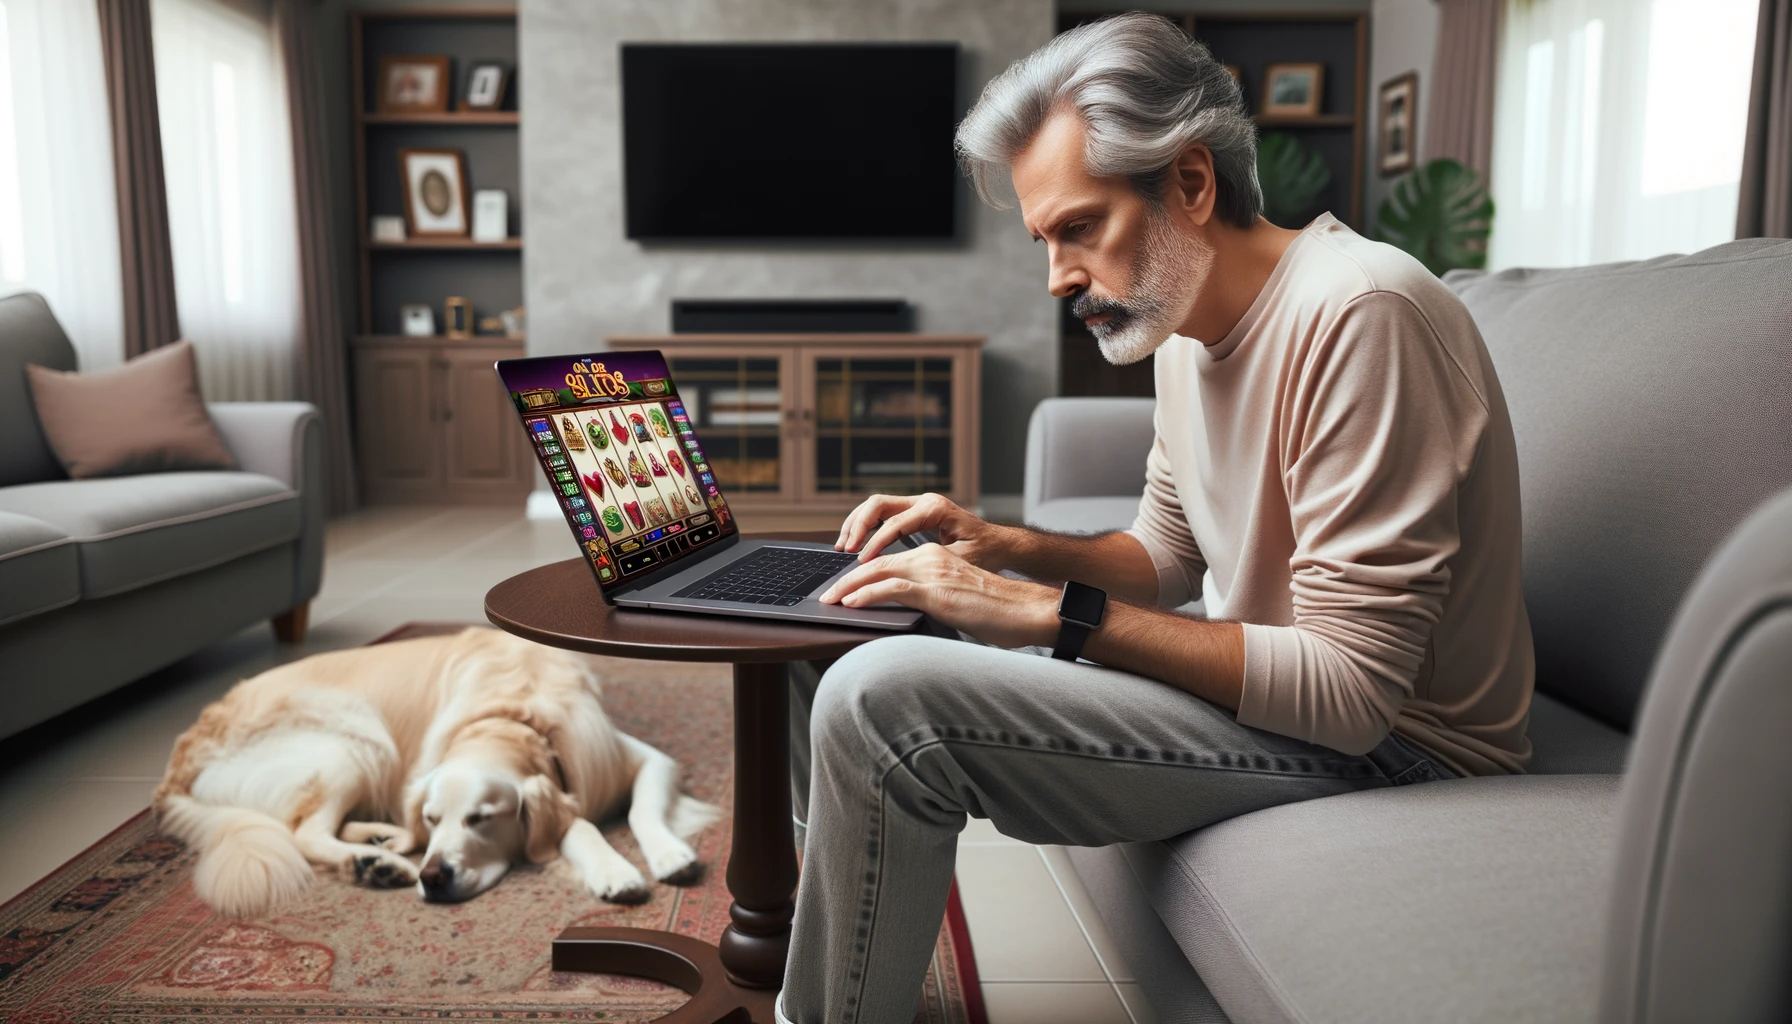 Photo of a middle-aged man with grayish hair, deeply engrossed in playing online slots on his laptop. He's seated in a family room with a large mounted TV on the wall. Beside him, a golden retriever snoozes peacefully on the floor.